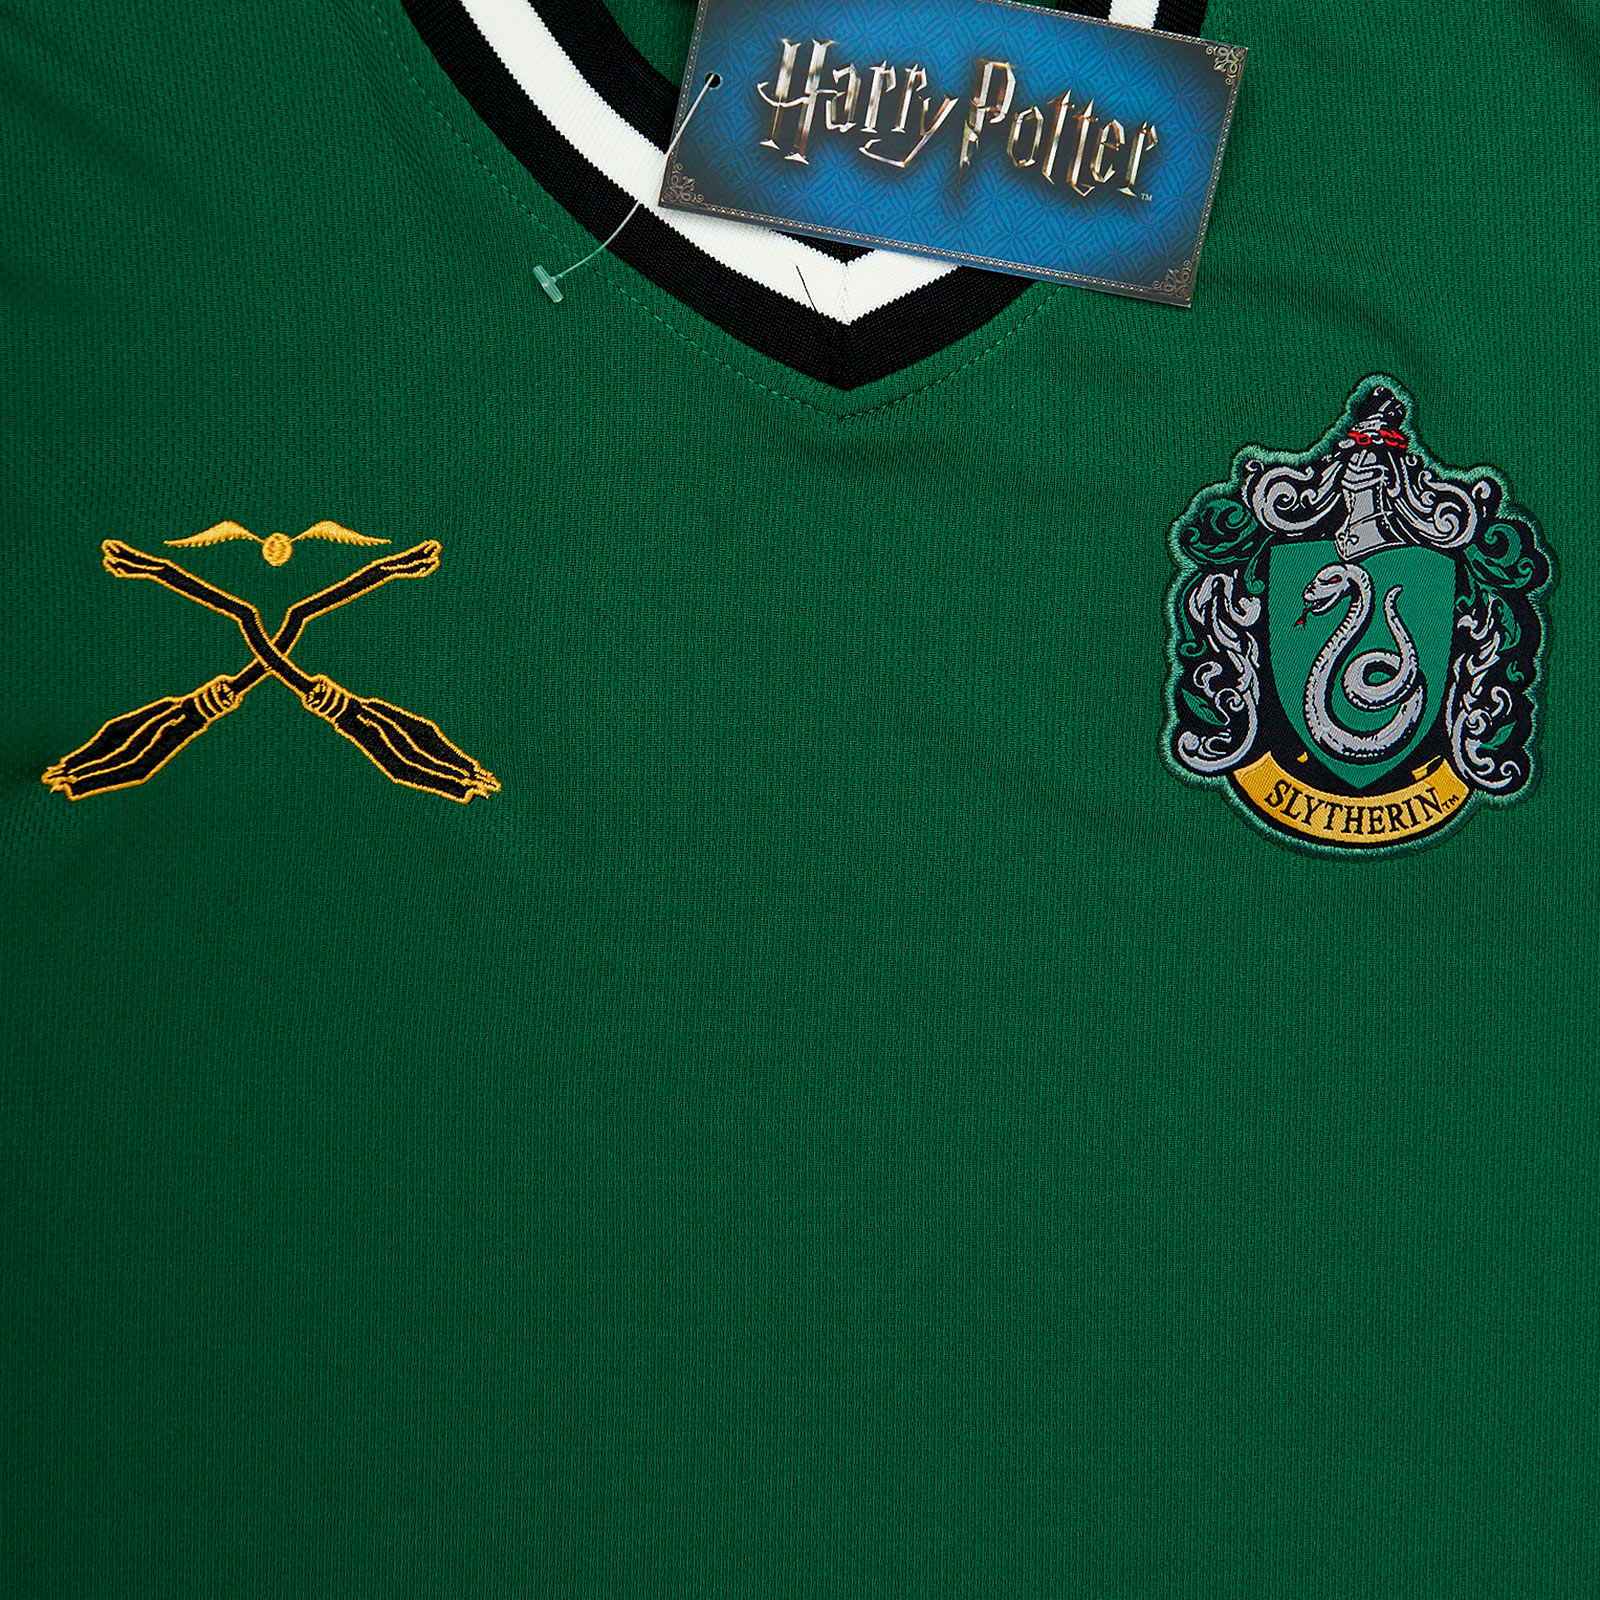 Harry Potter - Quidditch Team Slytherin T-Shirt